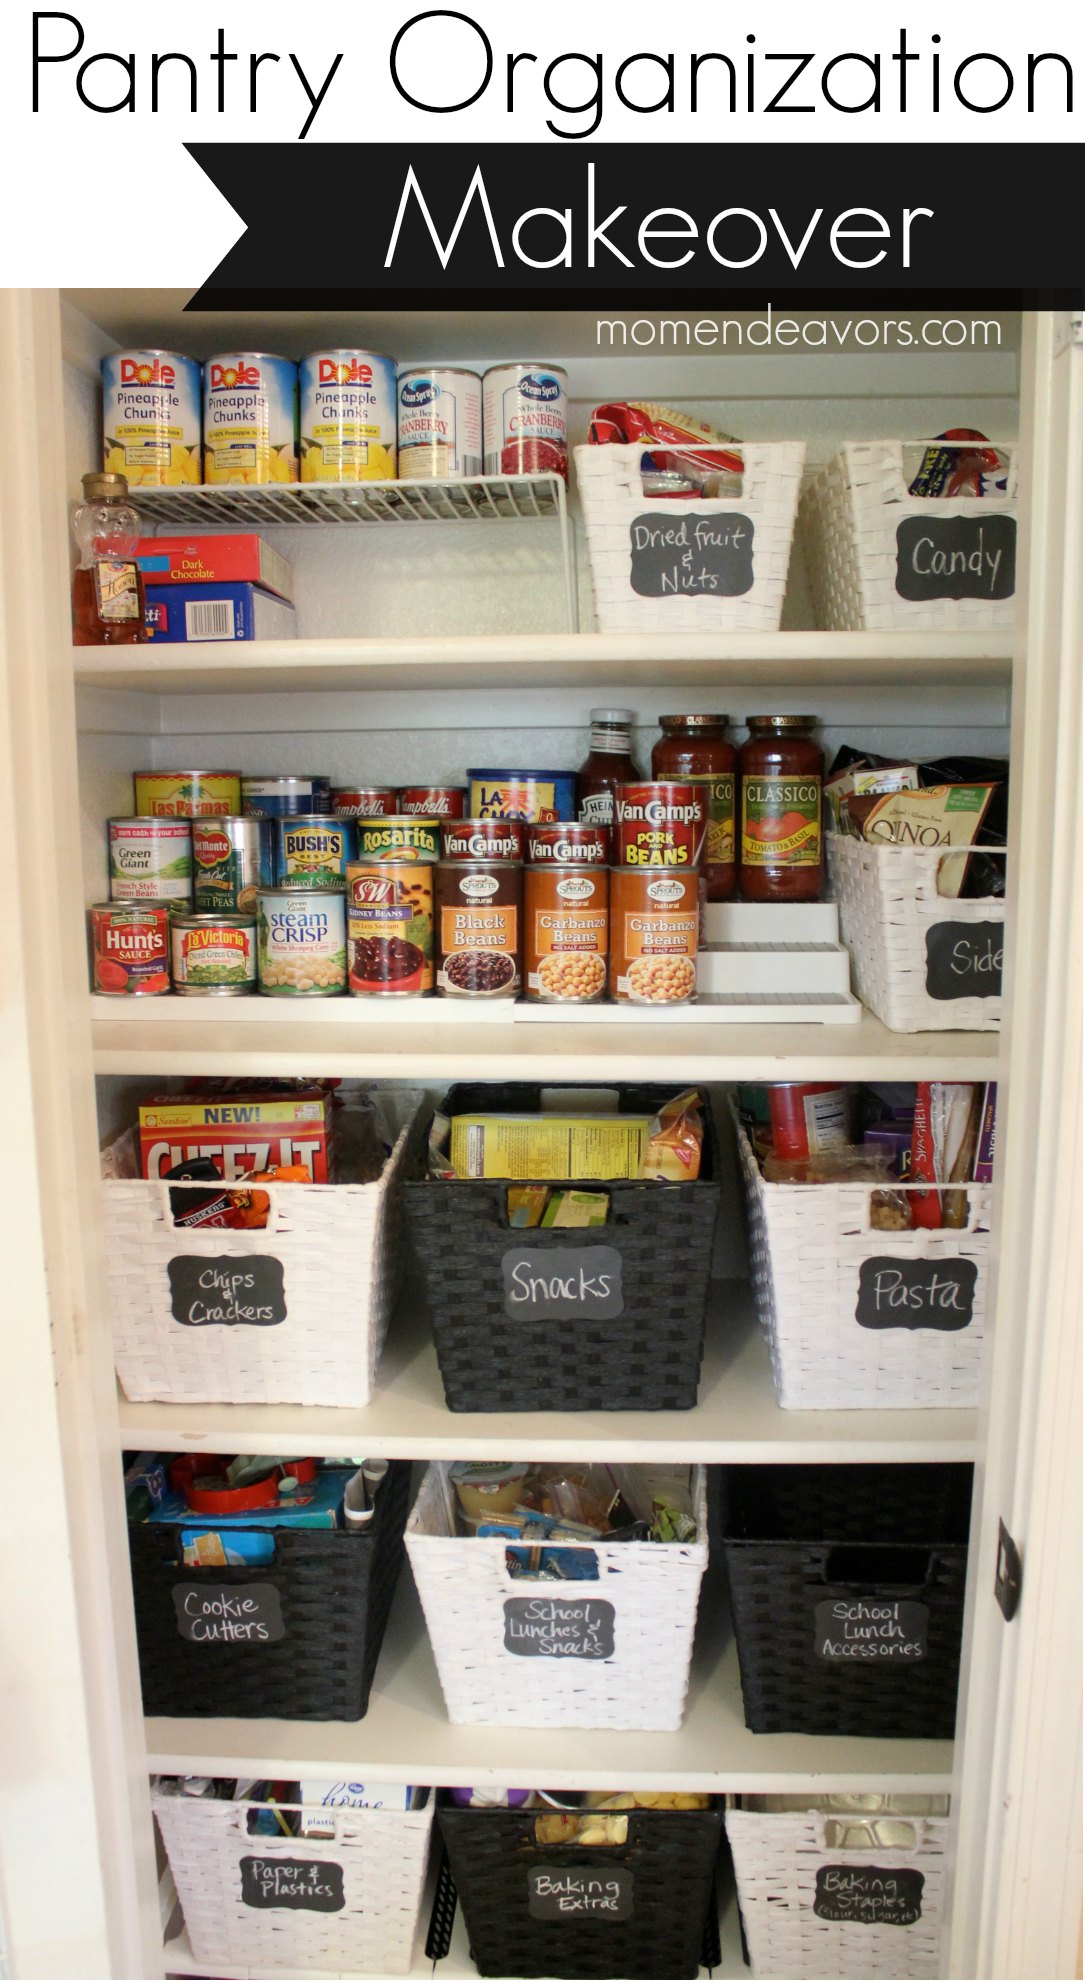 18 Incredible Small Pantry Organization Ideas and Makeovers   The ...